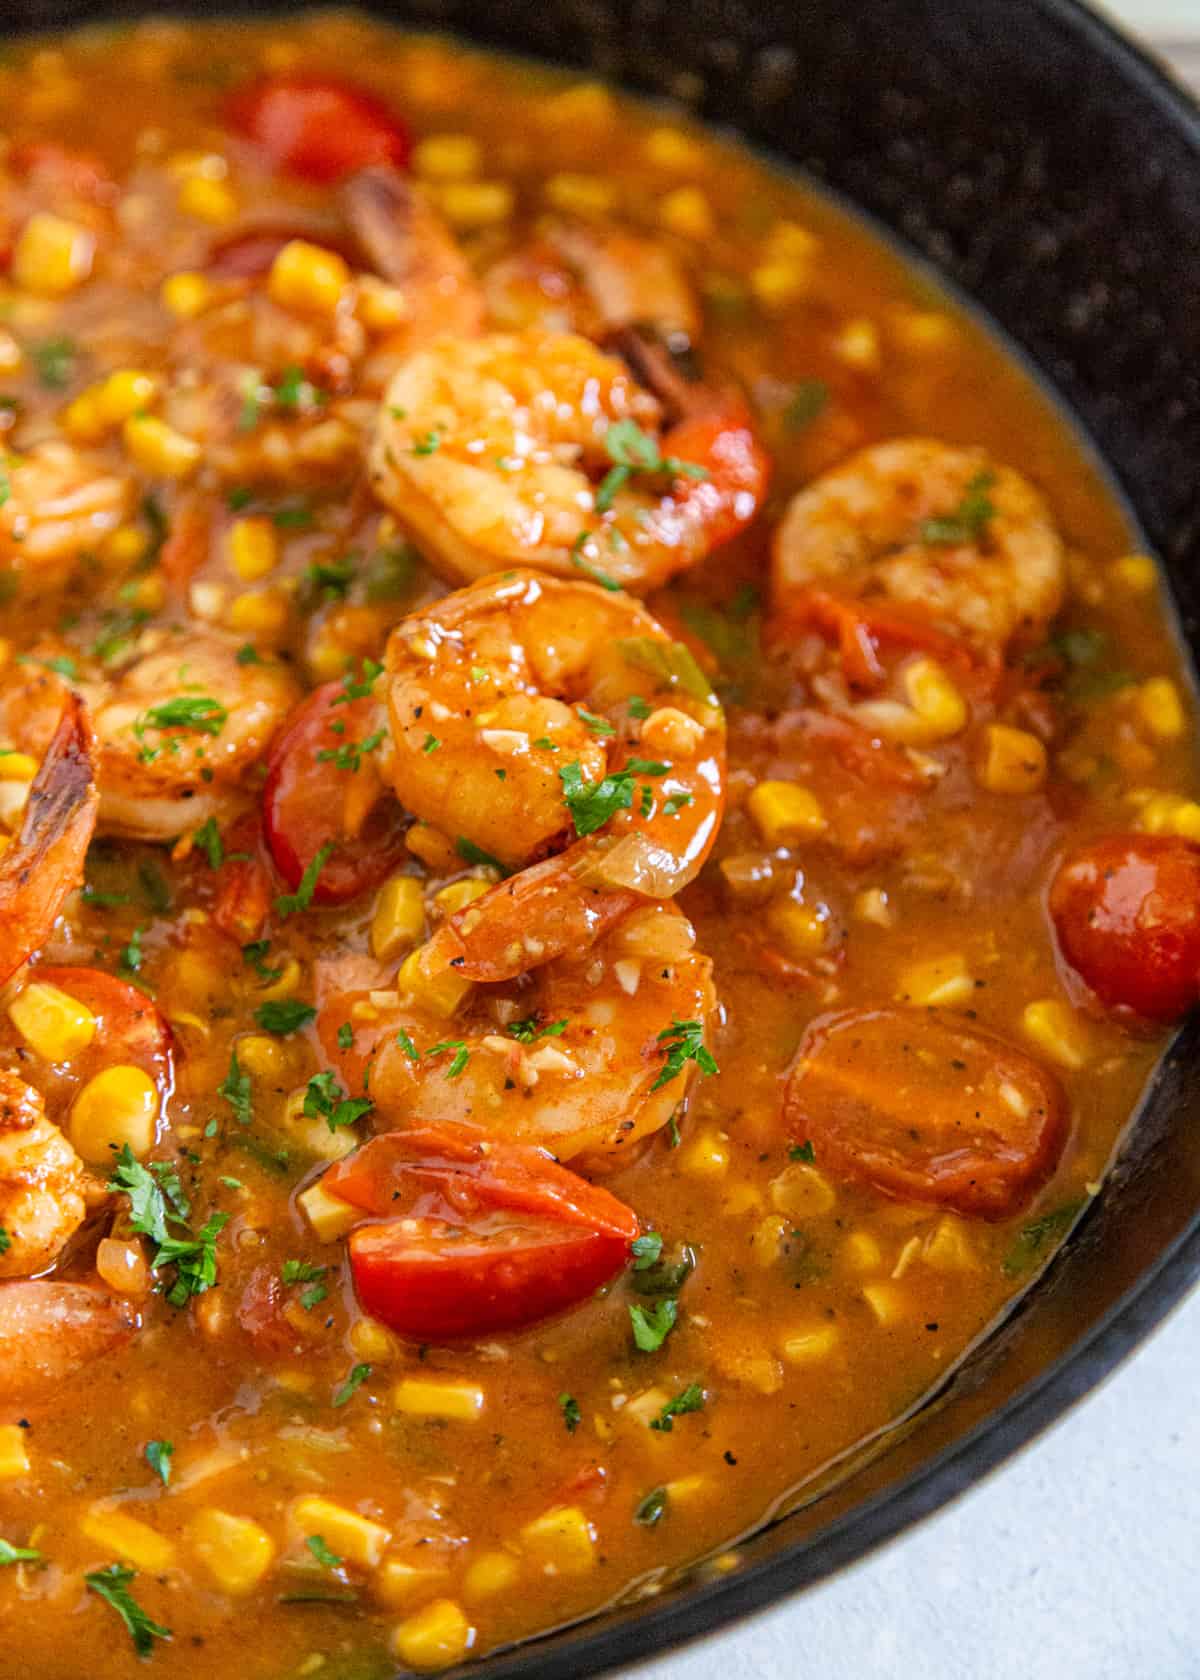 extreme closeup: shrimp and grits recipe cooking in a skillet with shrimp and tomatoes visible